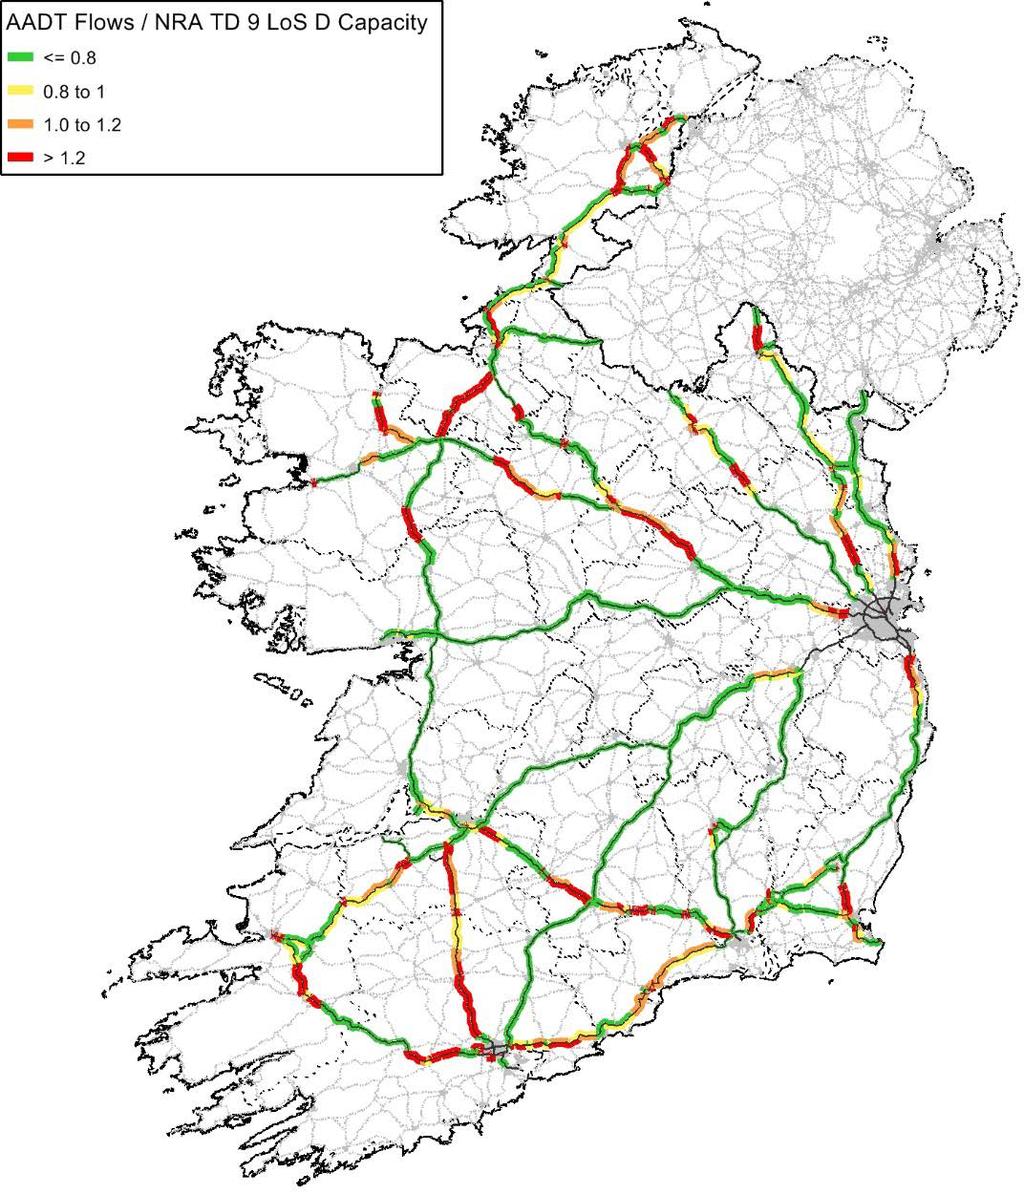 What sections of the Network were considered. AADT Flows / Capacity (LoS D) (< 1.0) = 1,941 km (1.0 to 1.